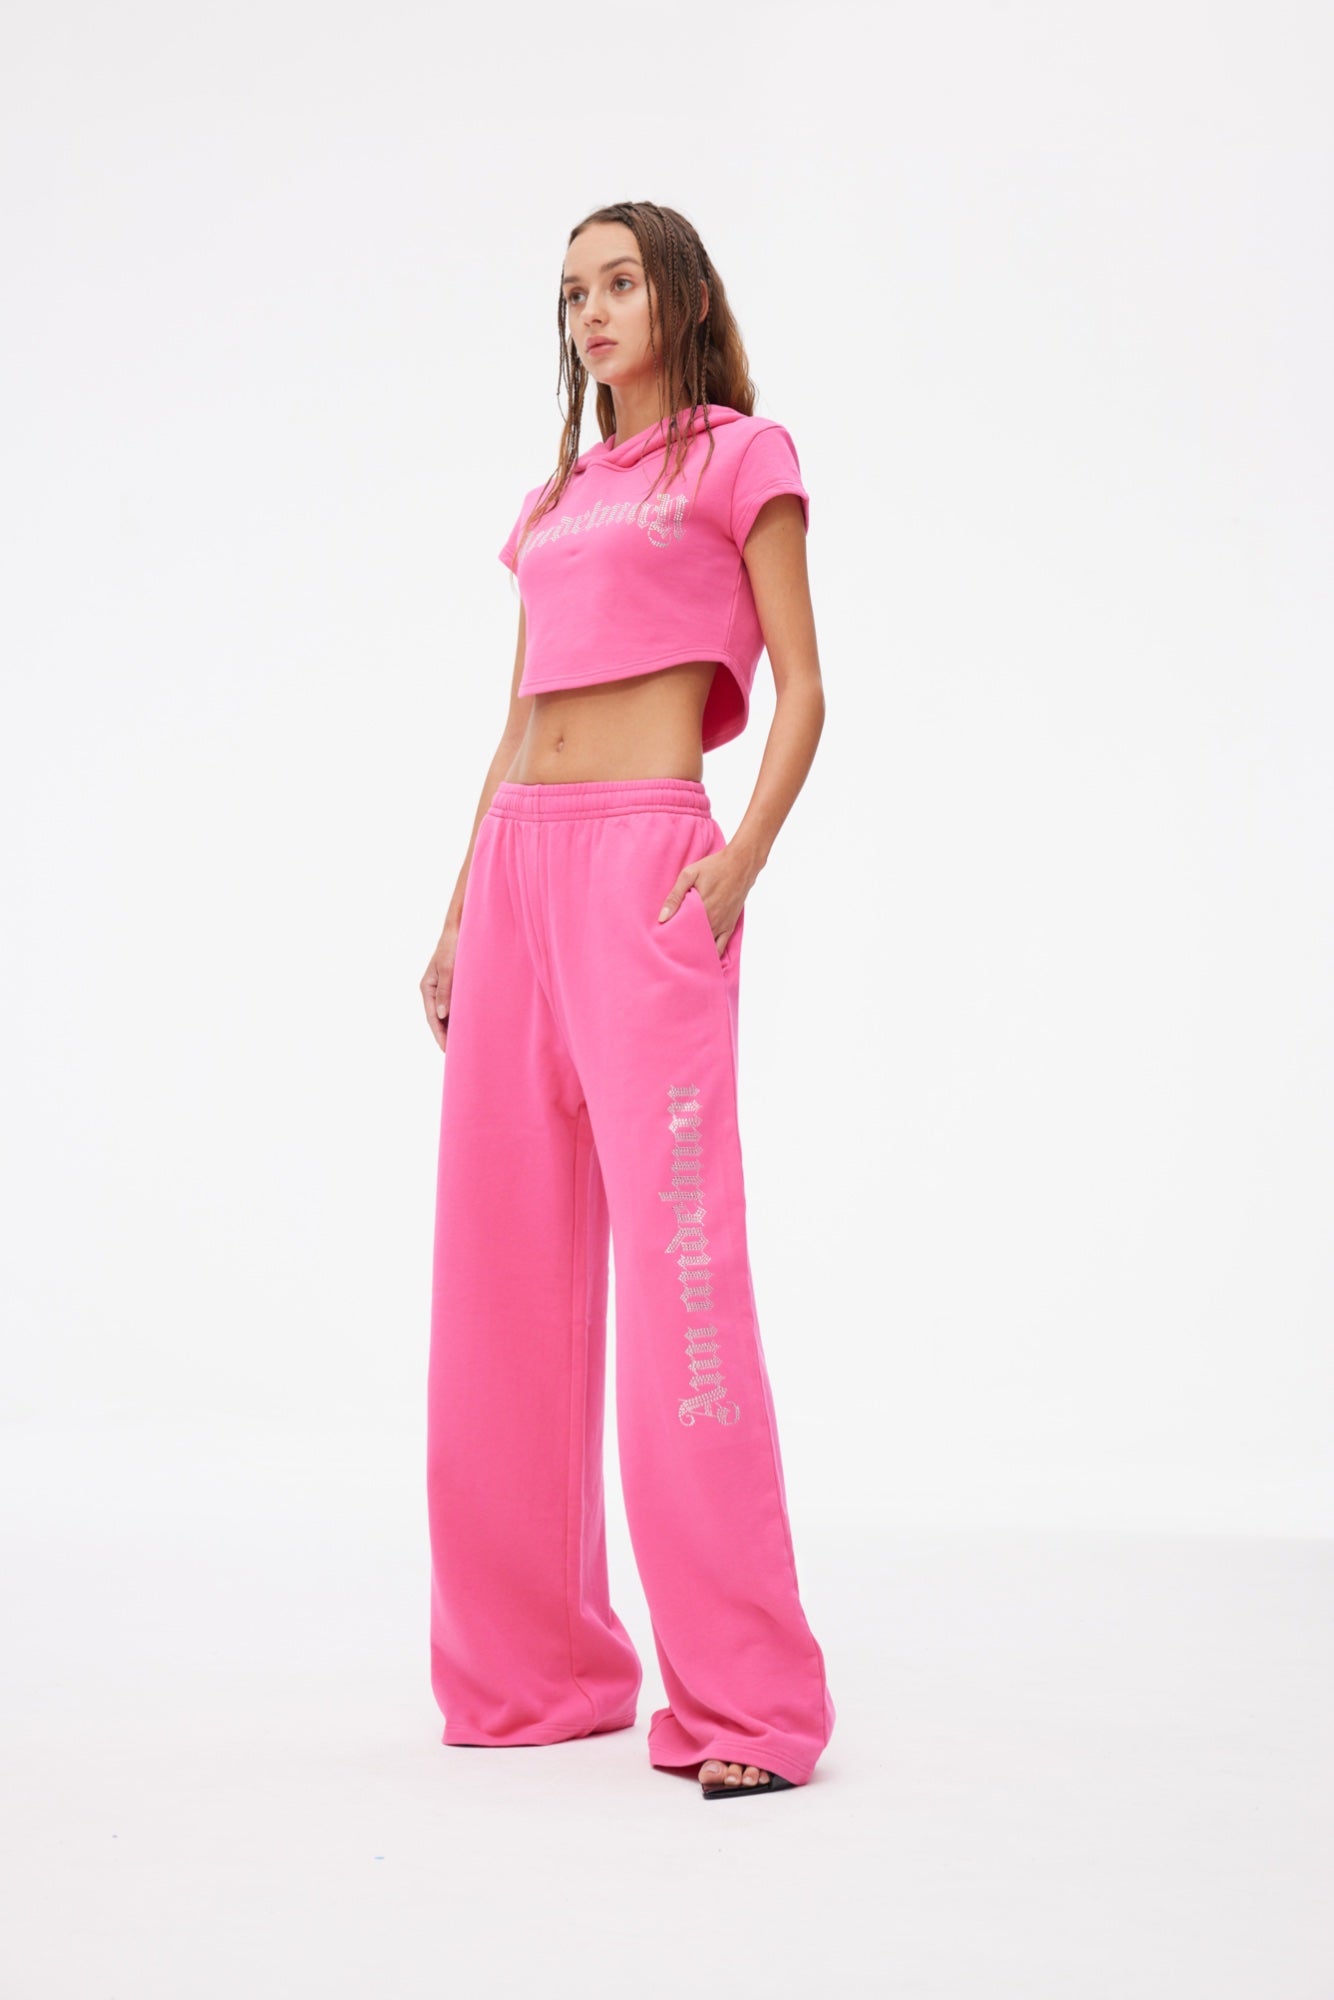 ANN ANDELMAN Gothic Crystal Long Pants Pink | MADA IN CHINA